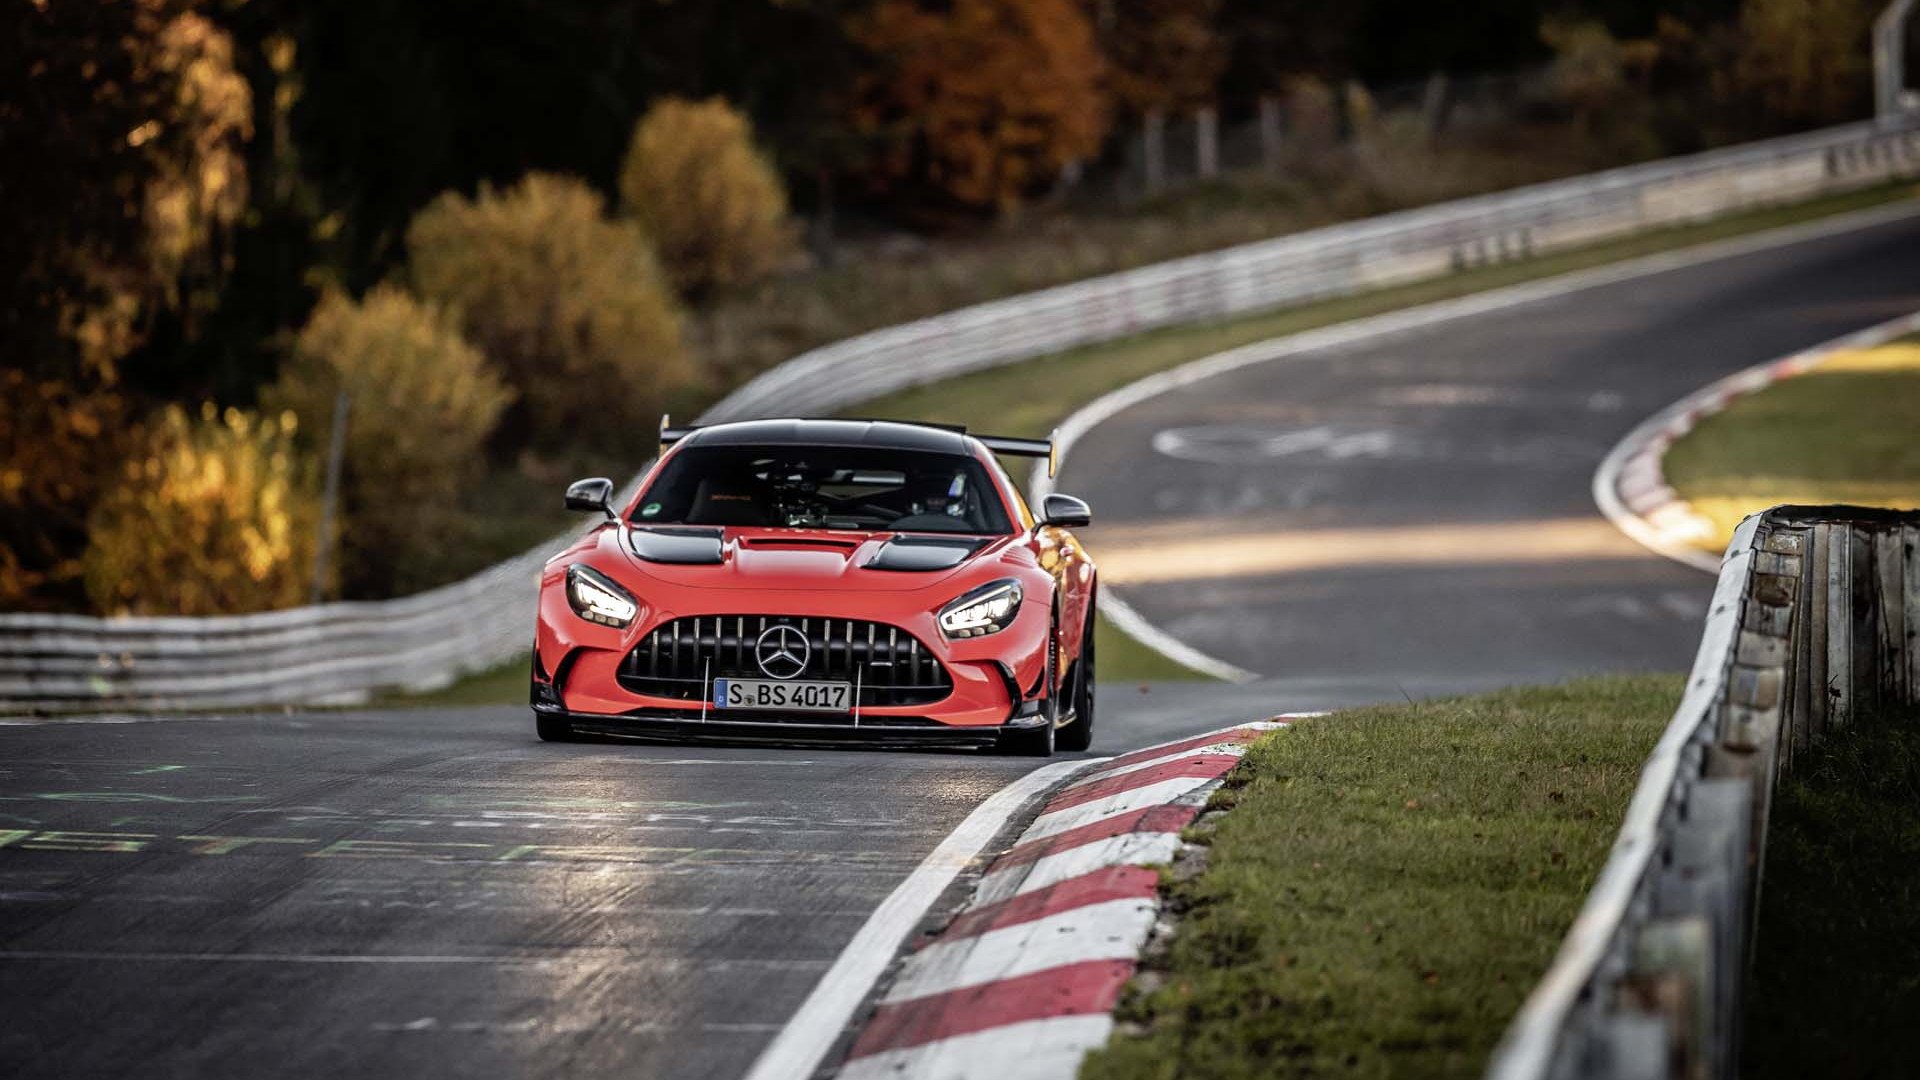 Mercedes Benz AMG GT Black Series Sets New Bar With 6:43.61 Nurburgring Production Car Lap Record